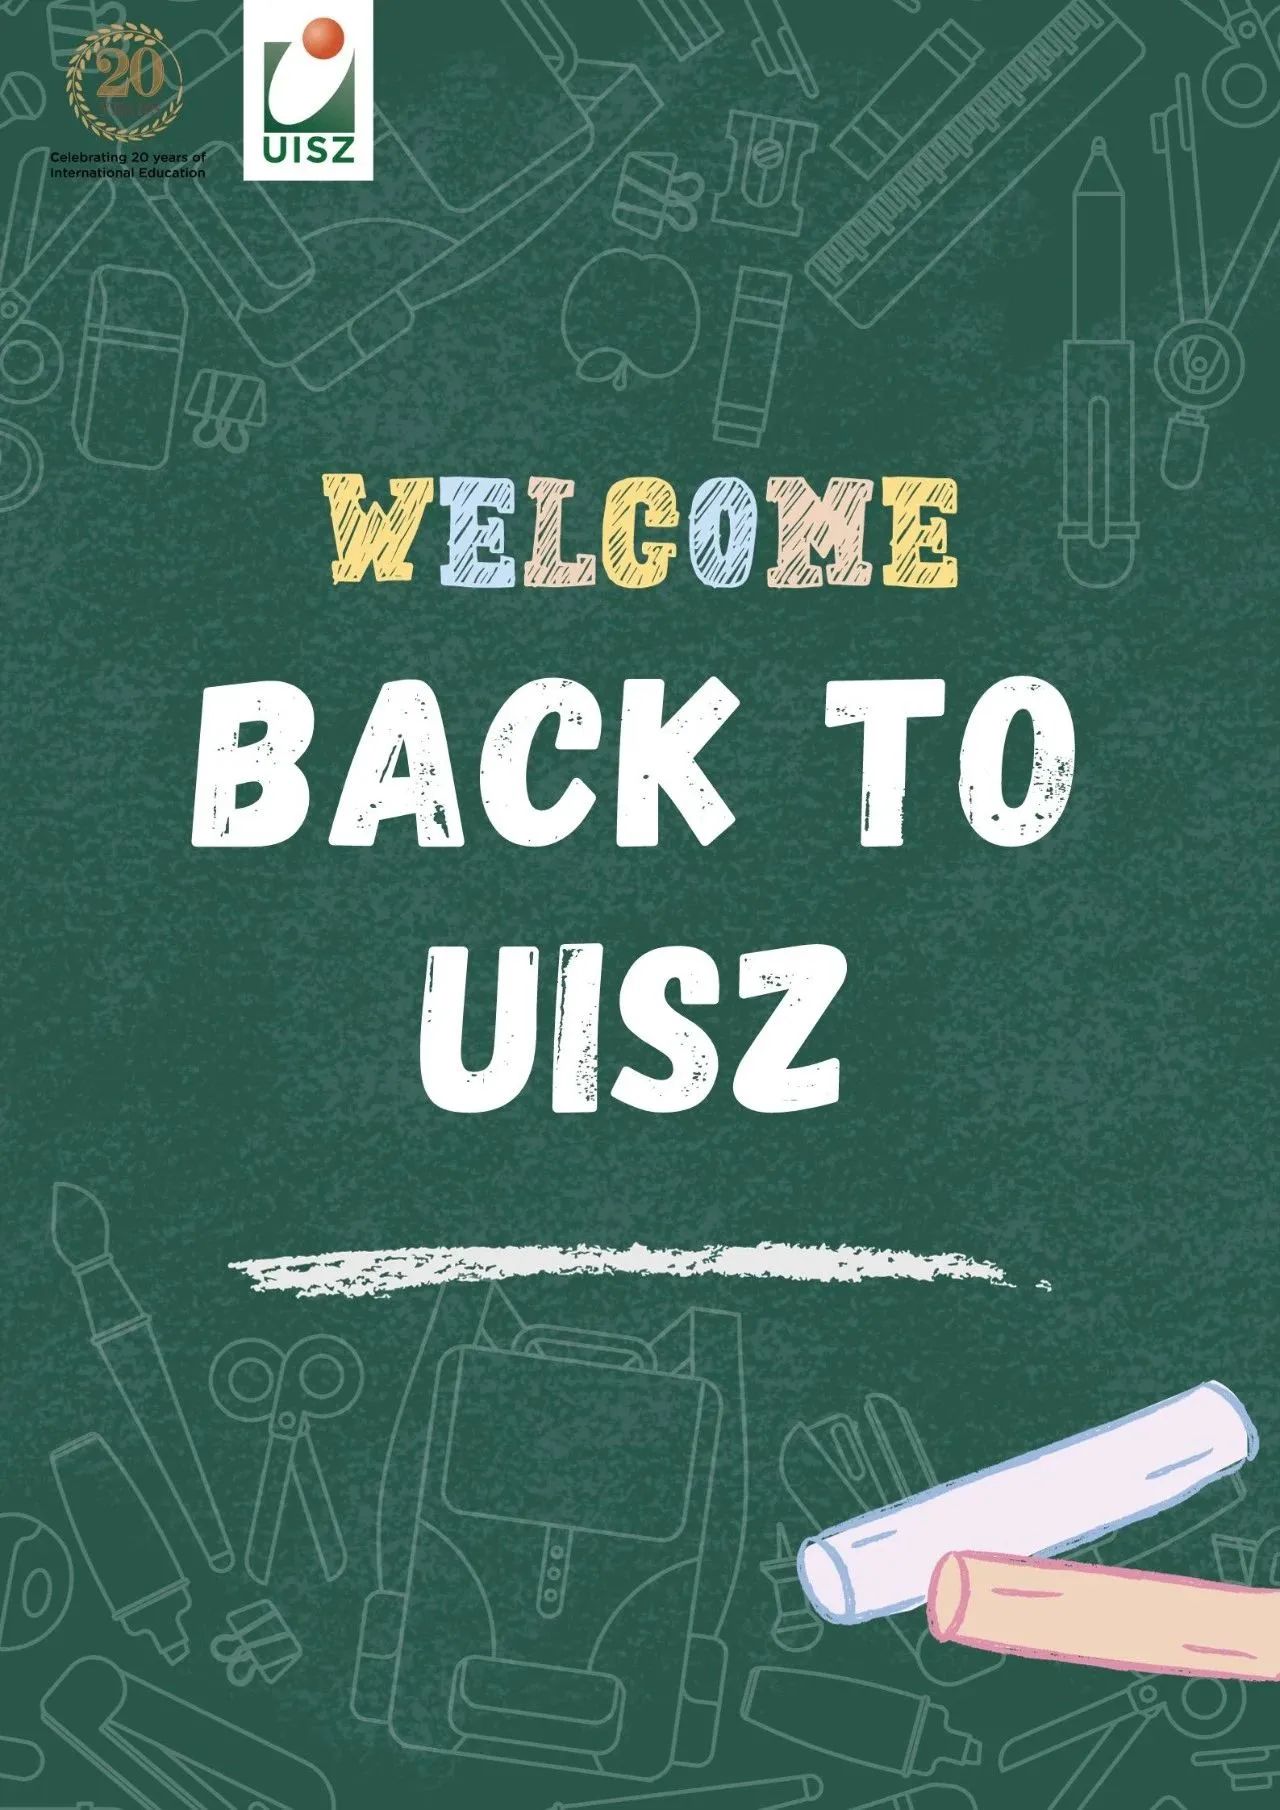 The 1st UISZ Openday In 2024 is coming! 增城誉德莱2024年首场开放日即将到来！